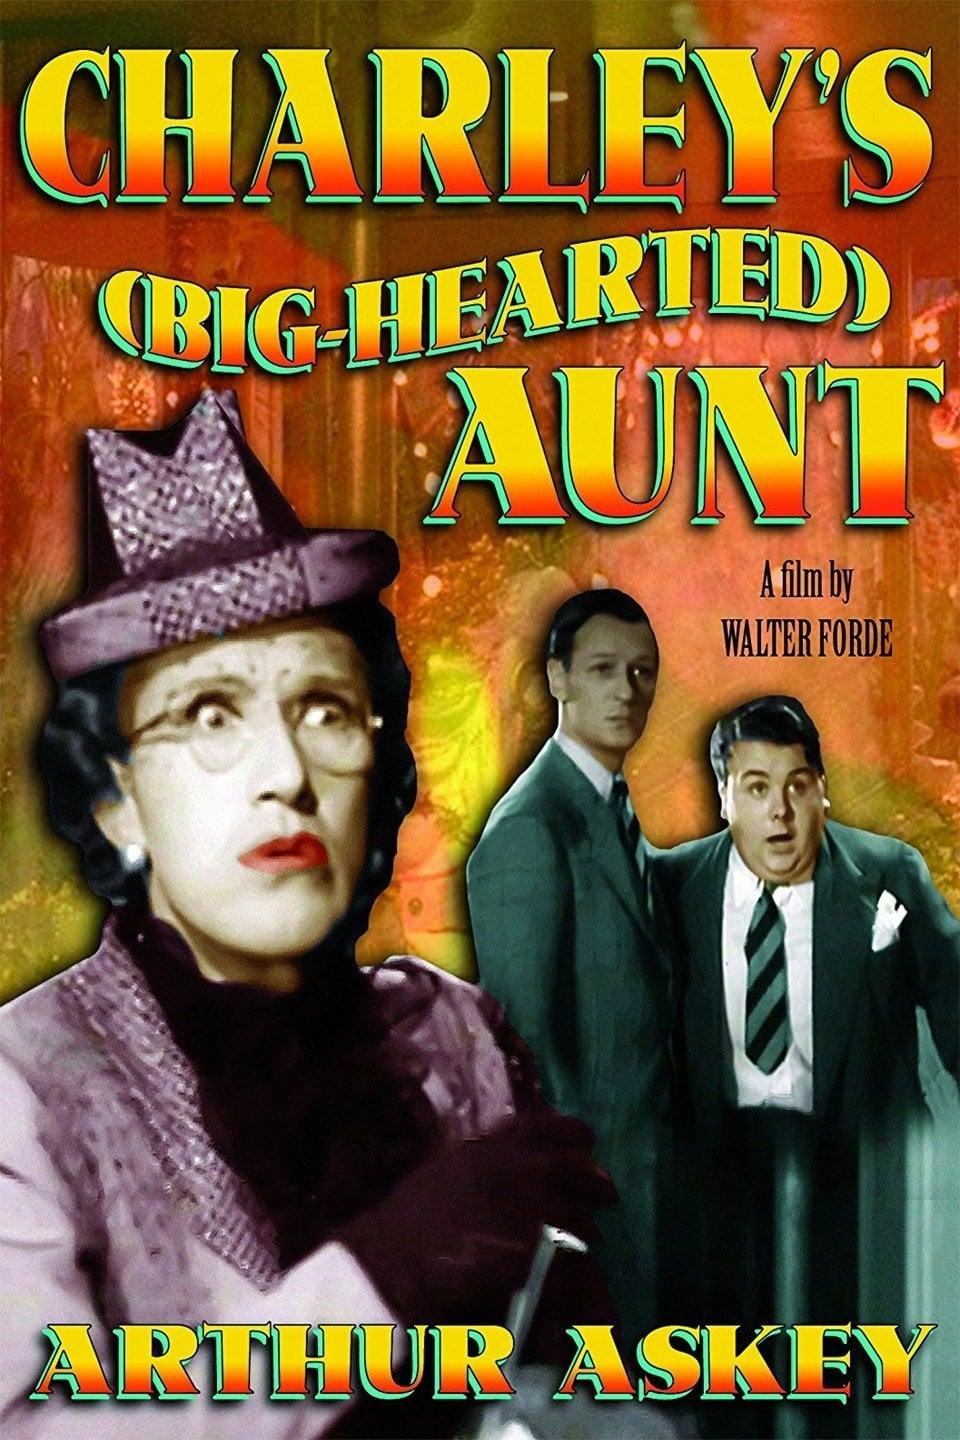 Charley's (Big-Hearted) Aunt poster